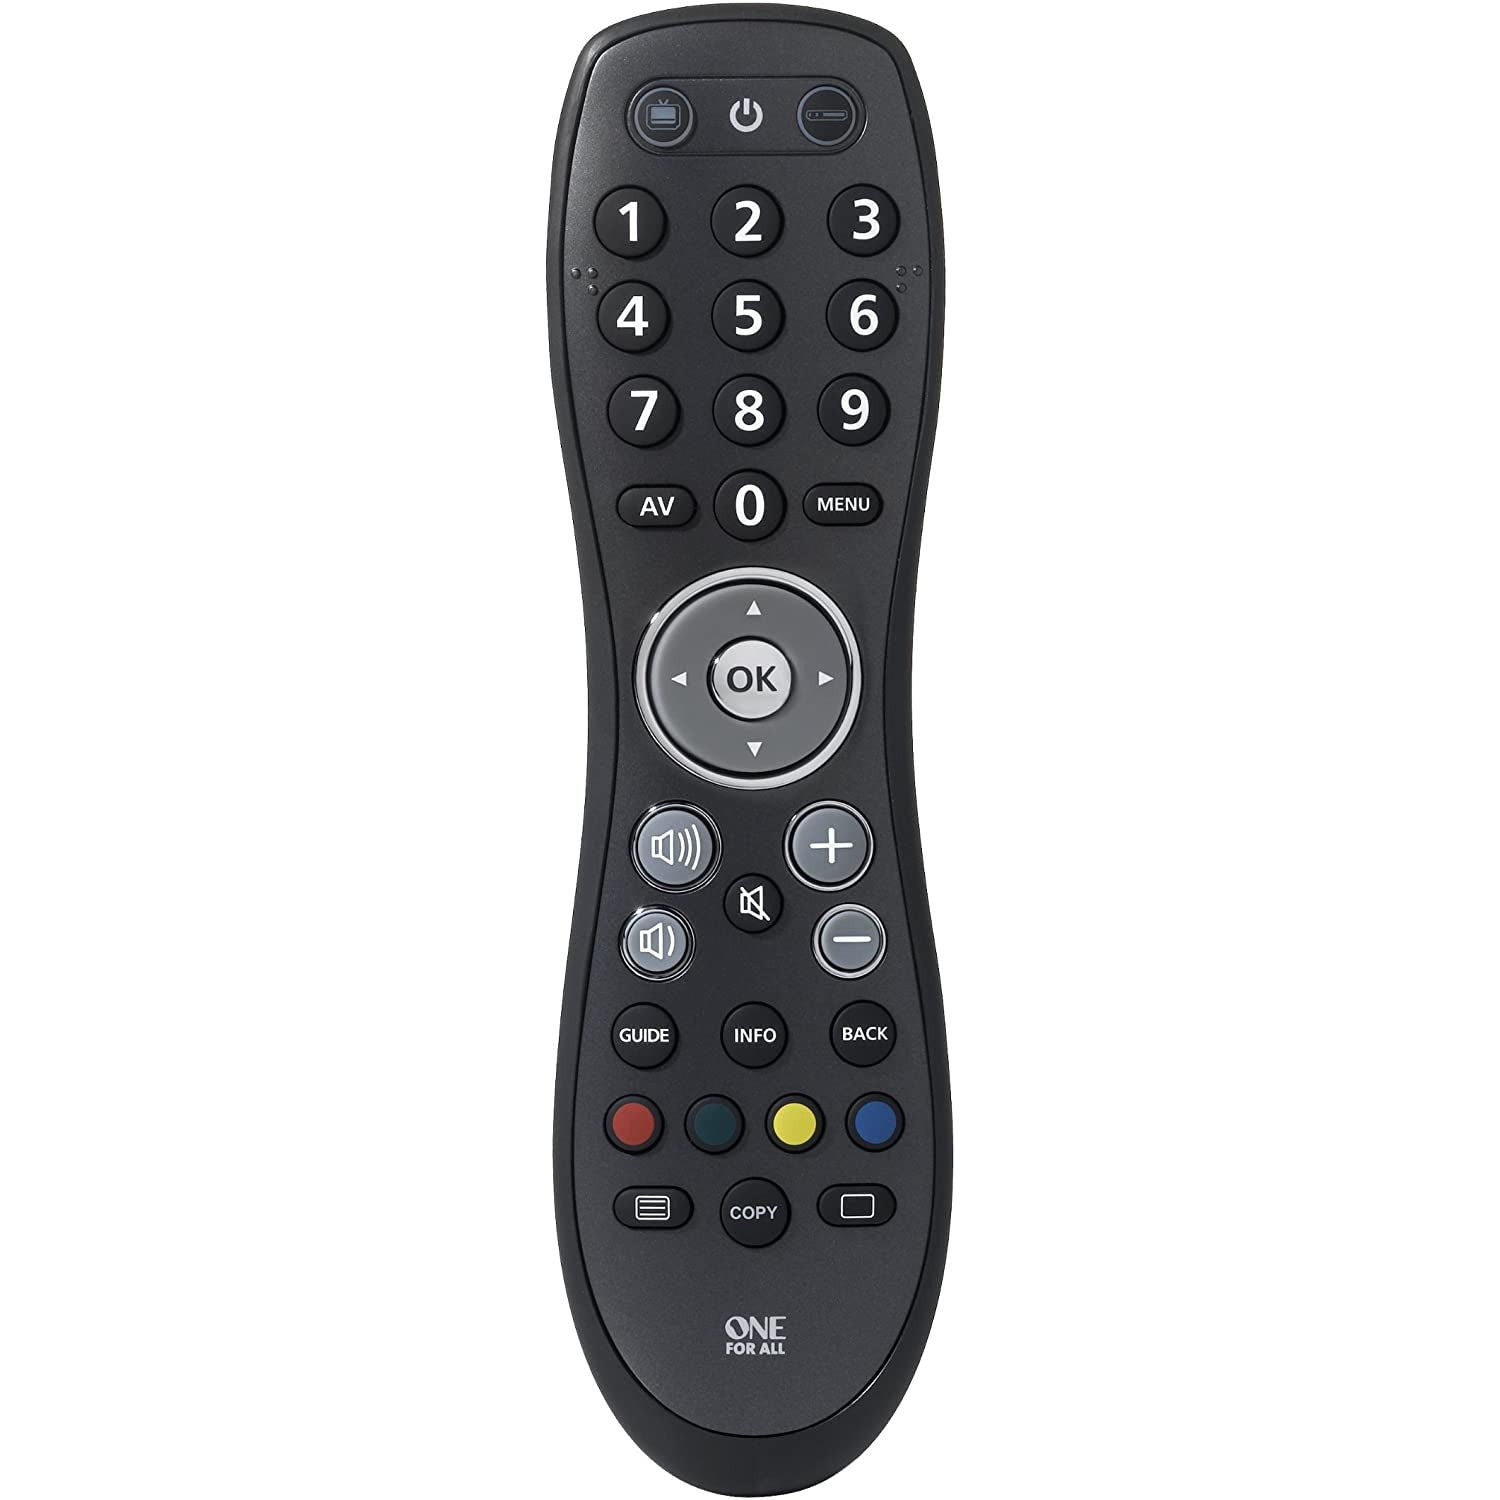 One For All Simple 2 Universal remote control - Perfect replacement remote for 2 devices: TV and STB - Black